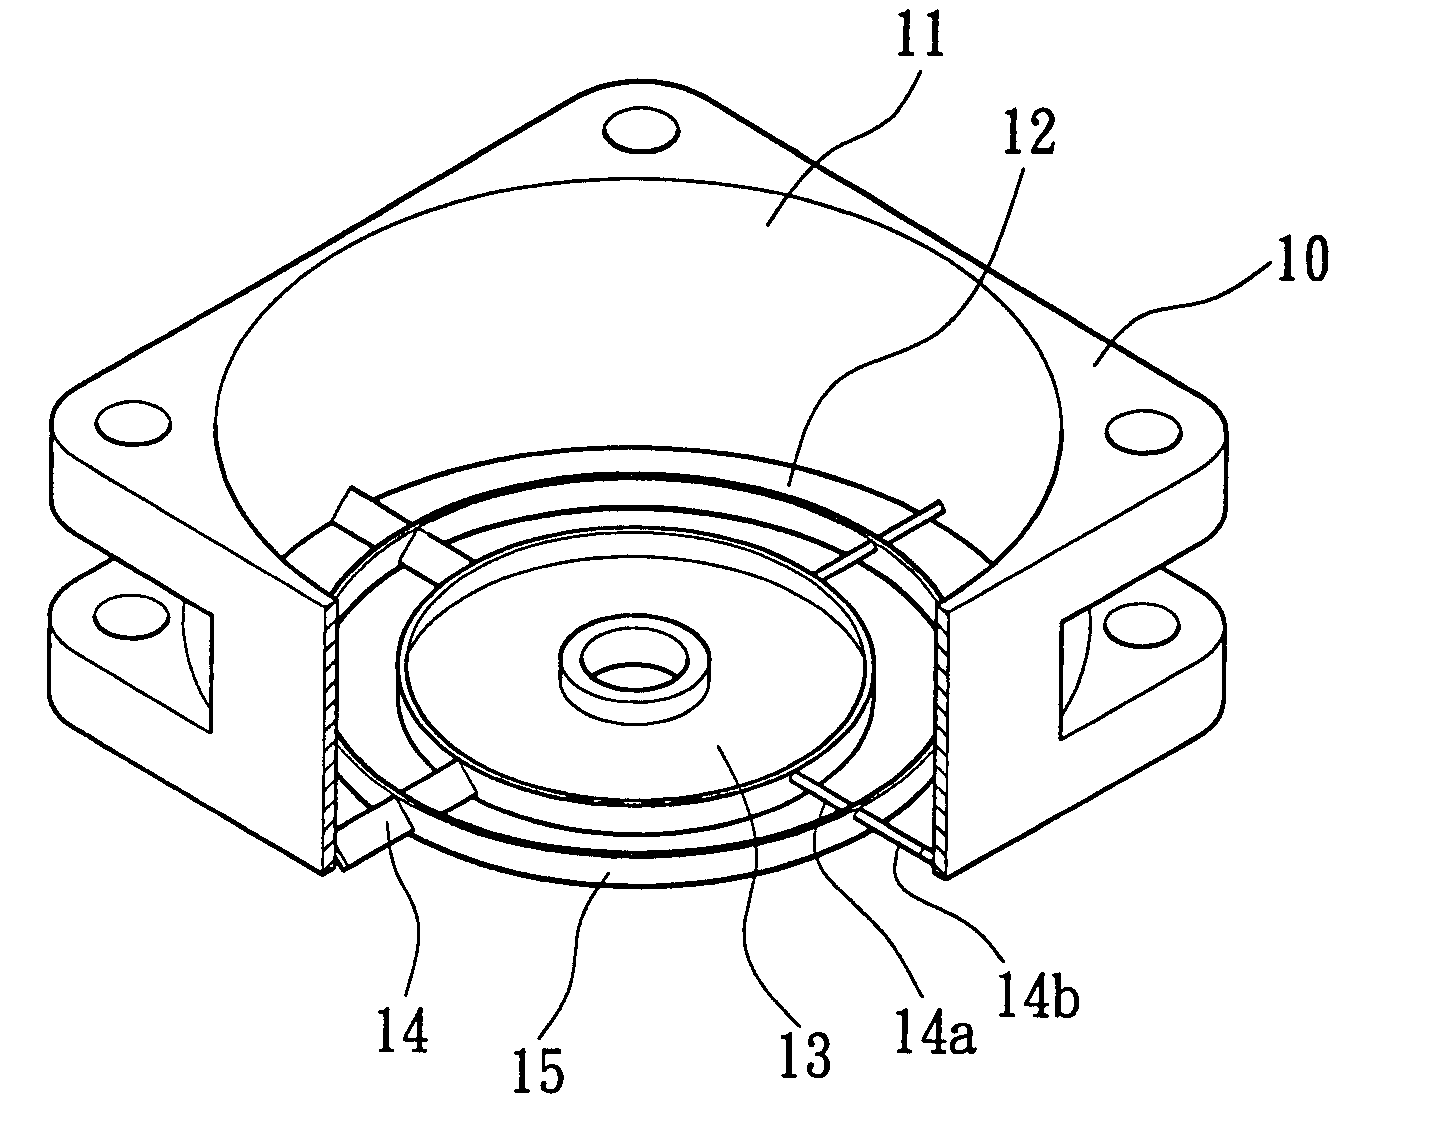 Airflow guiding structure for a heat-dissipating fan